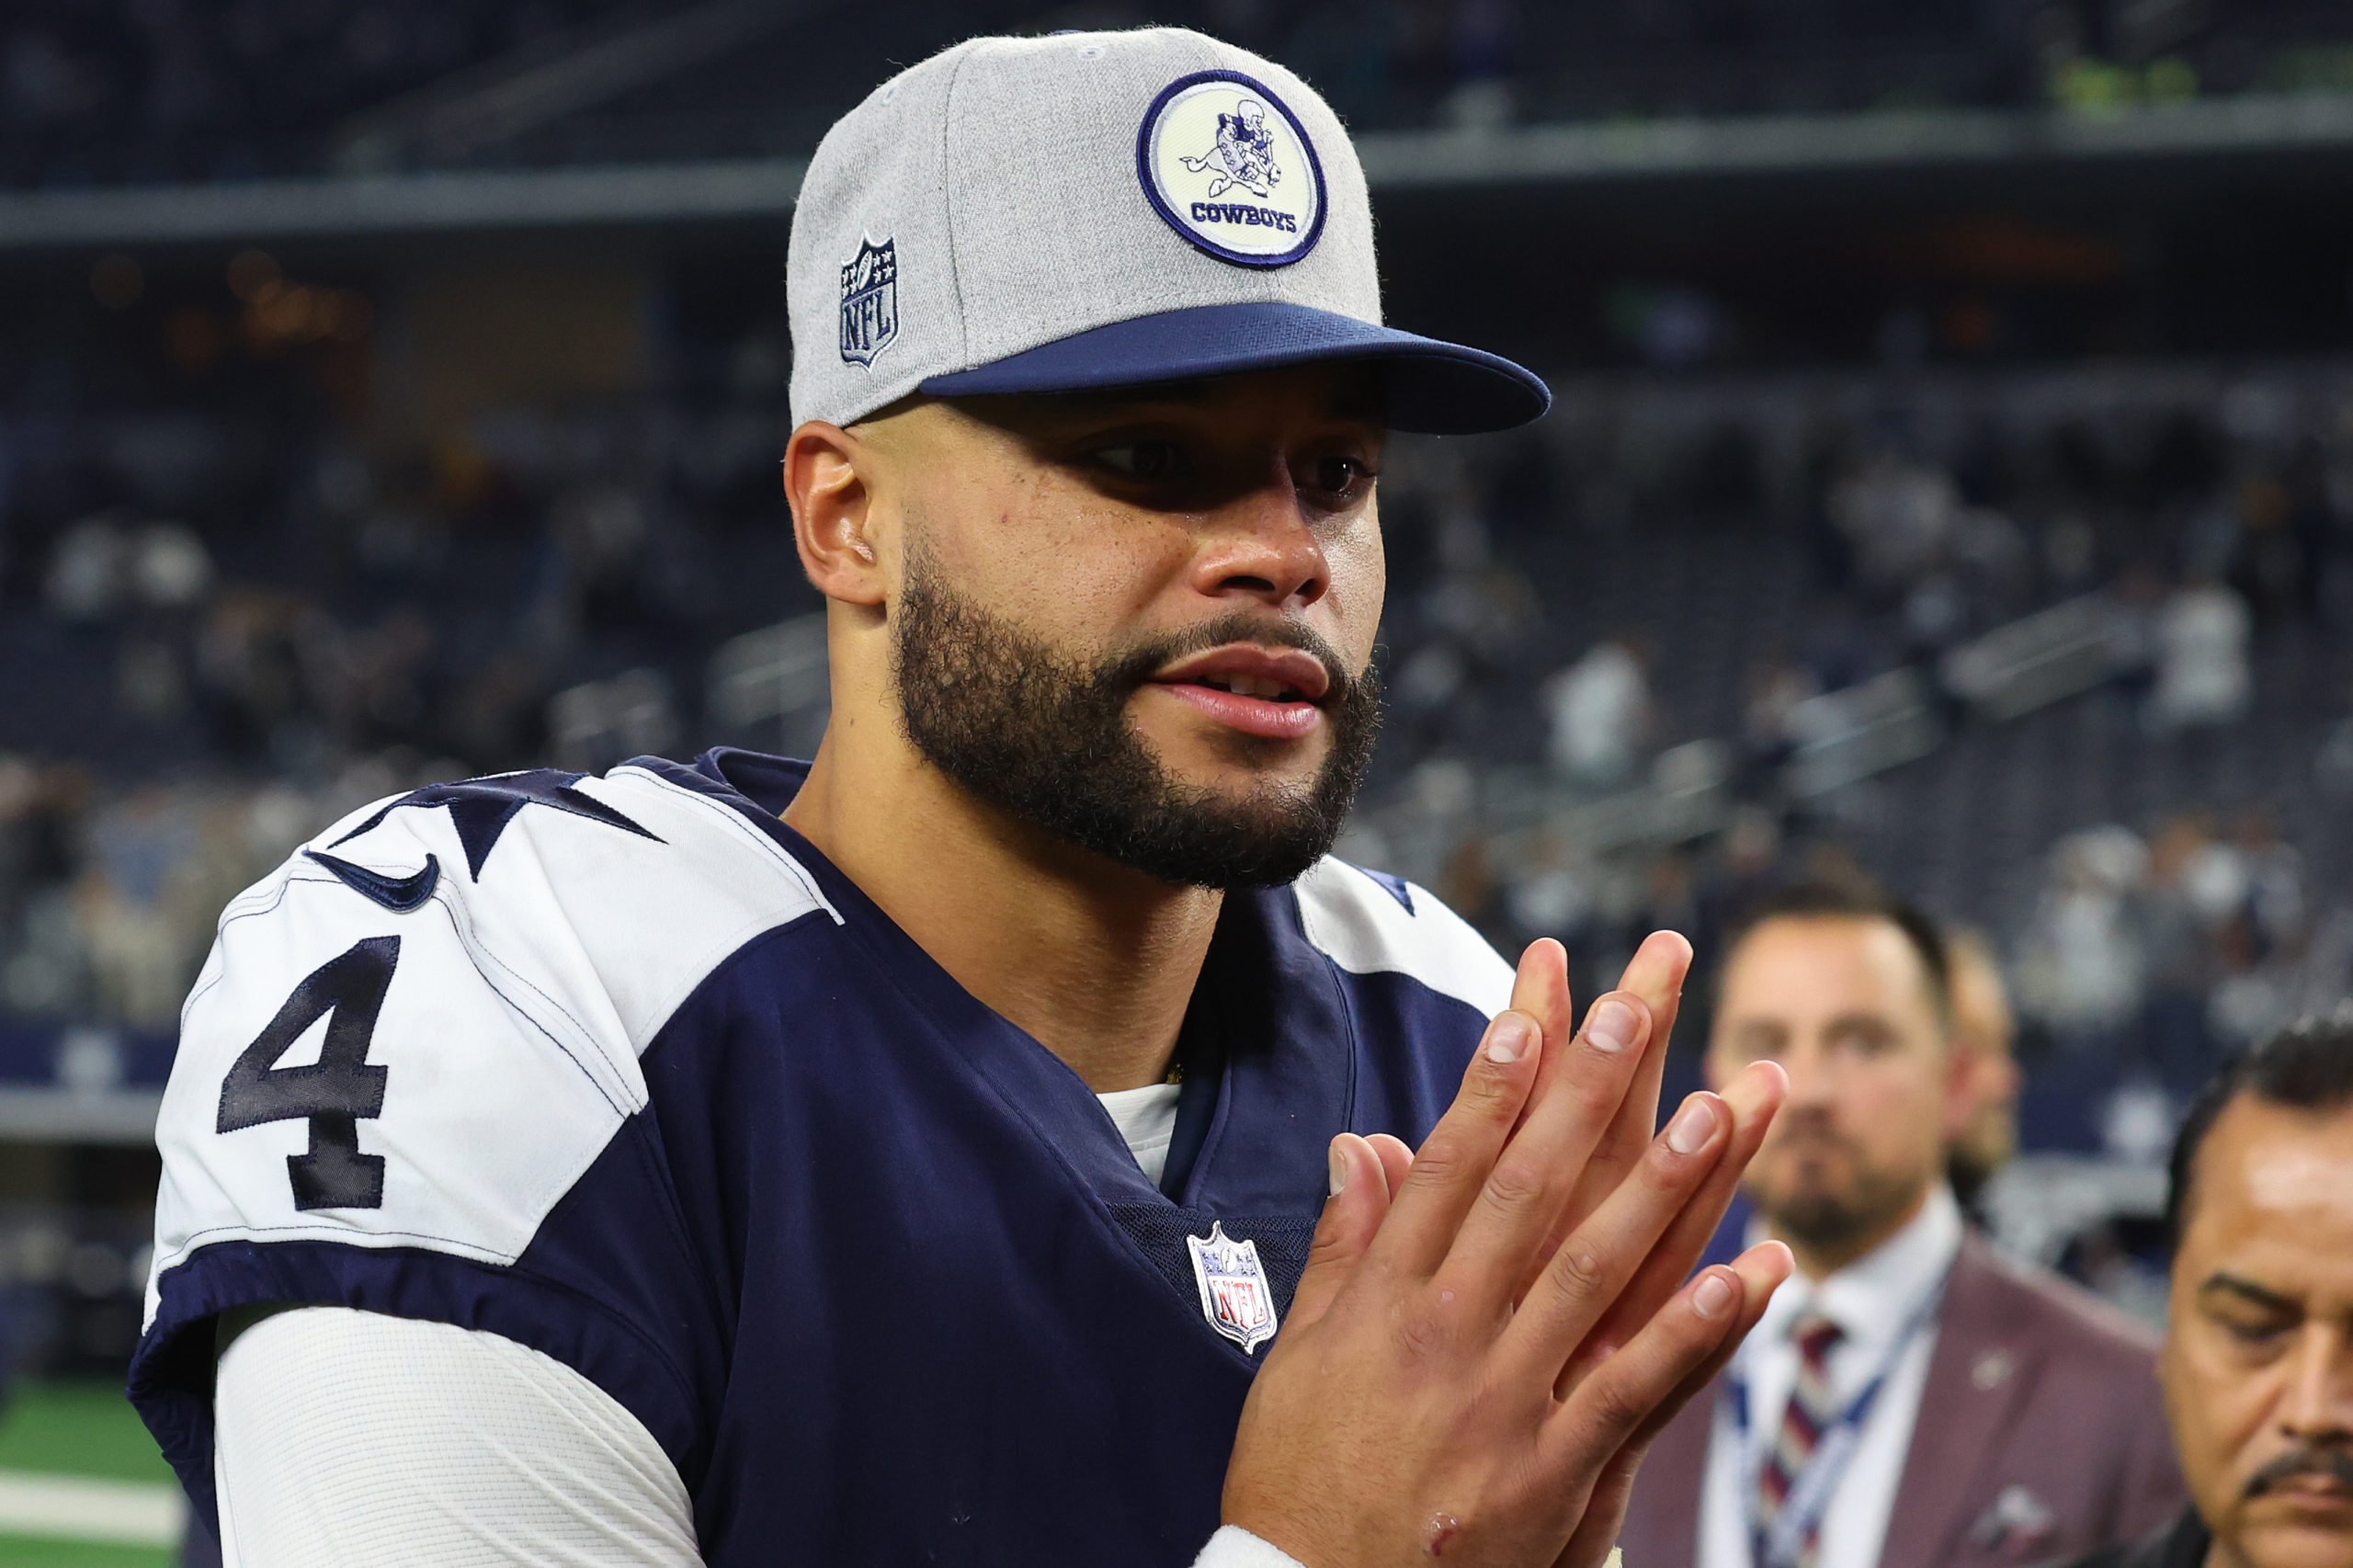 Dak Prescott of the Dallas Cowboys has weighed in on a controversial photo of the team owner.